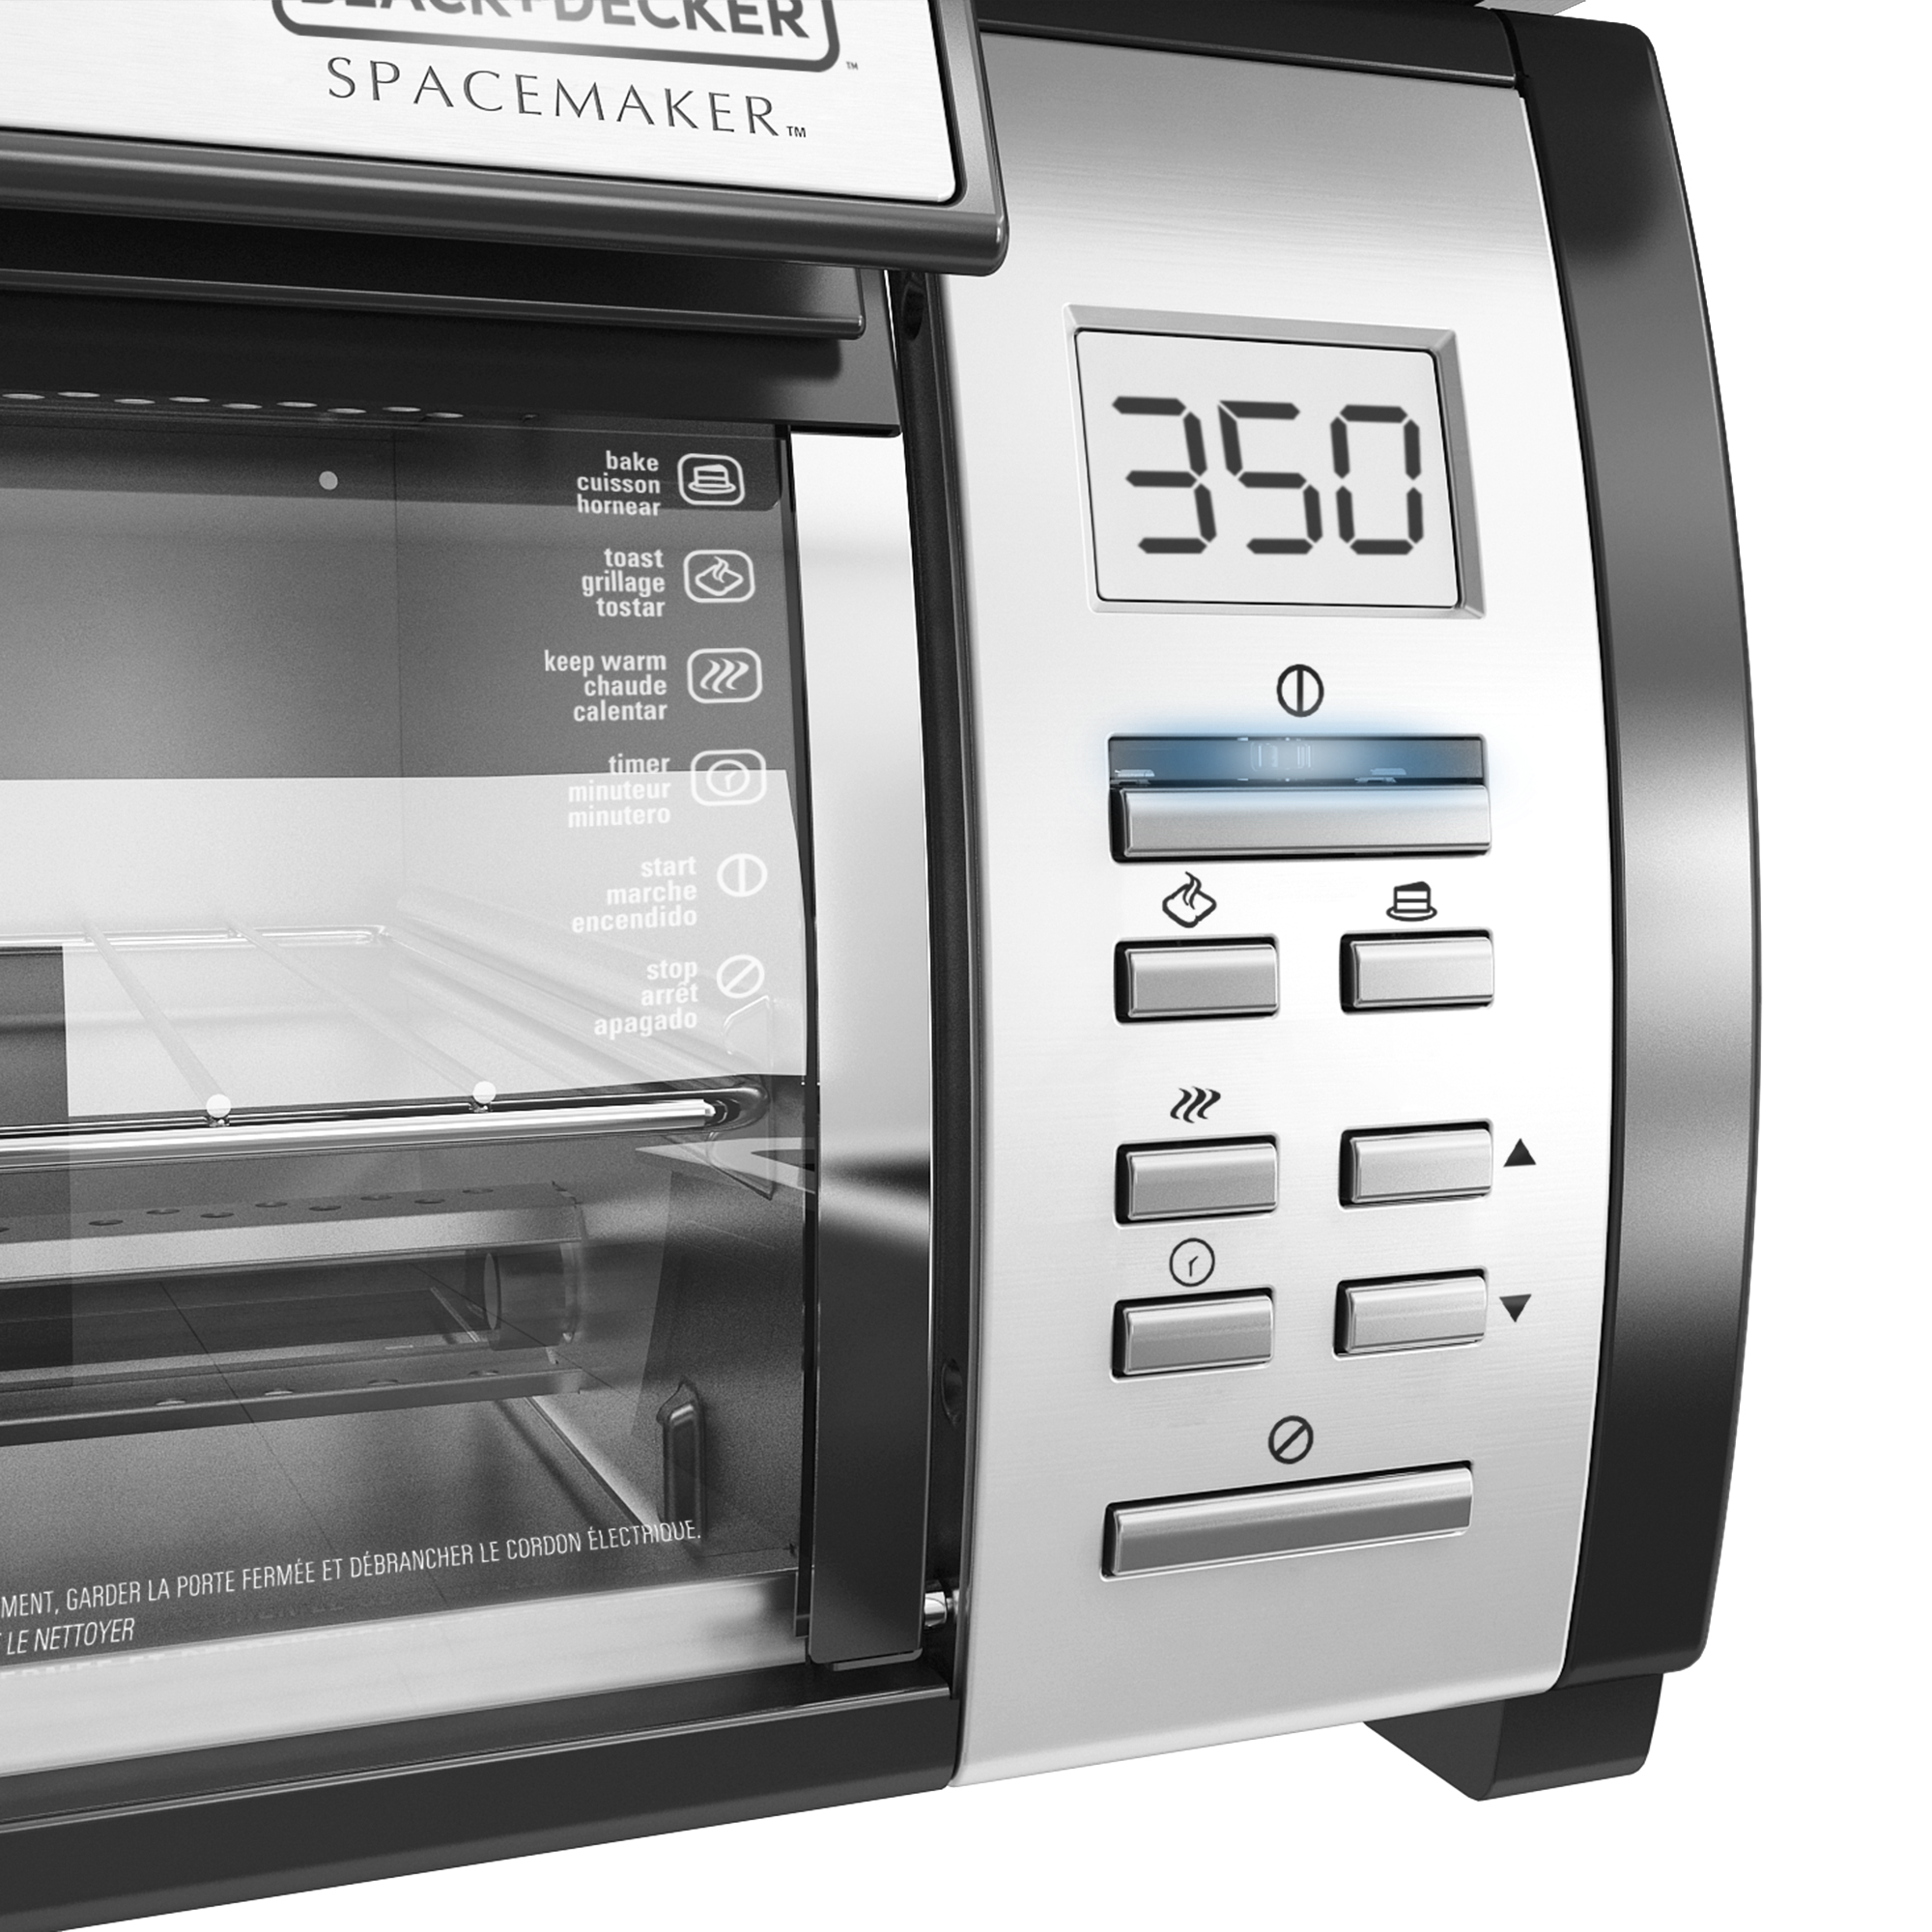 BLACK+DECKER SpaceMaker Under-Counter Toaster Oven, Black/Silver, TROS1000D - image 2 of 10